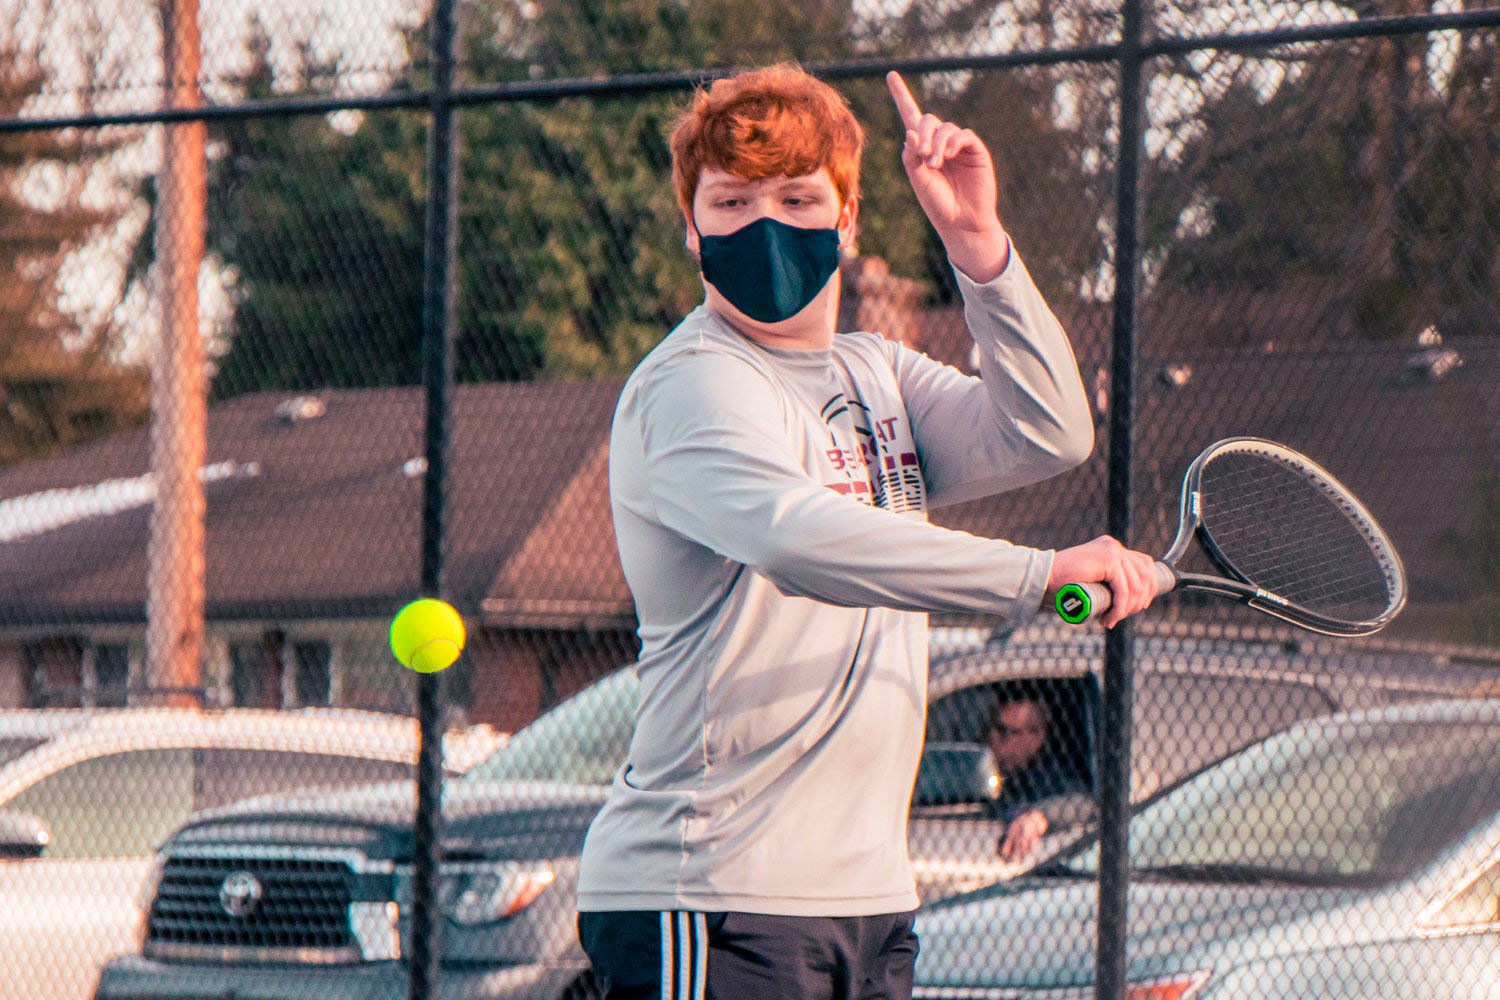 FILE PHOTO - Christian Iverson watches the ball as he prepares to swing during a doubles match against Black Hills earlier this season.